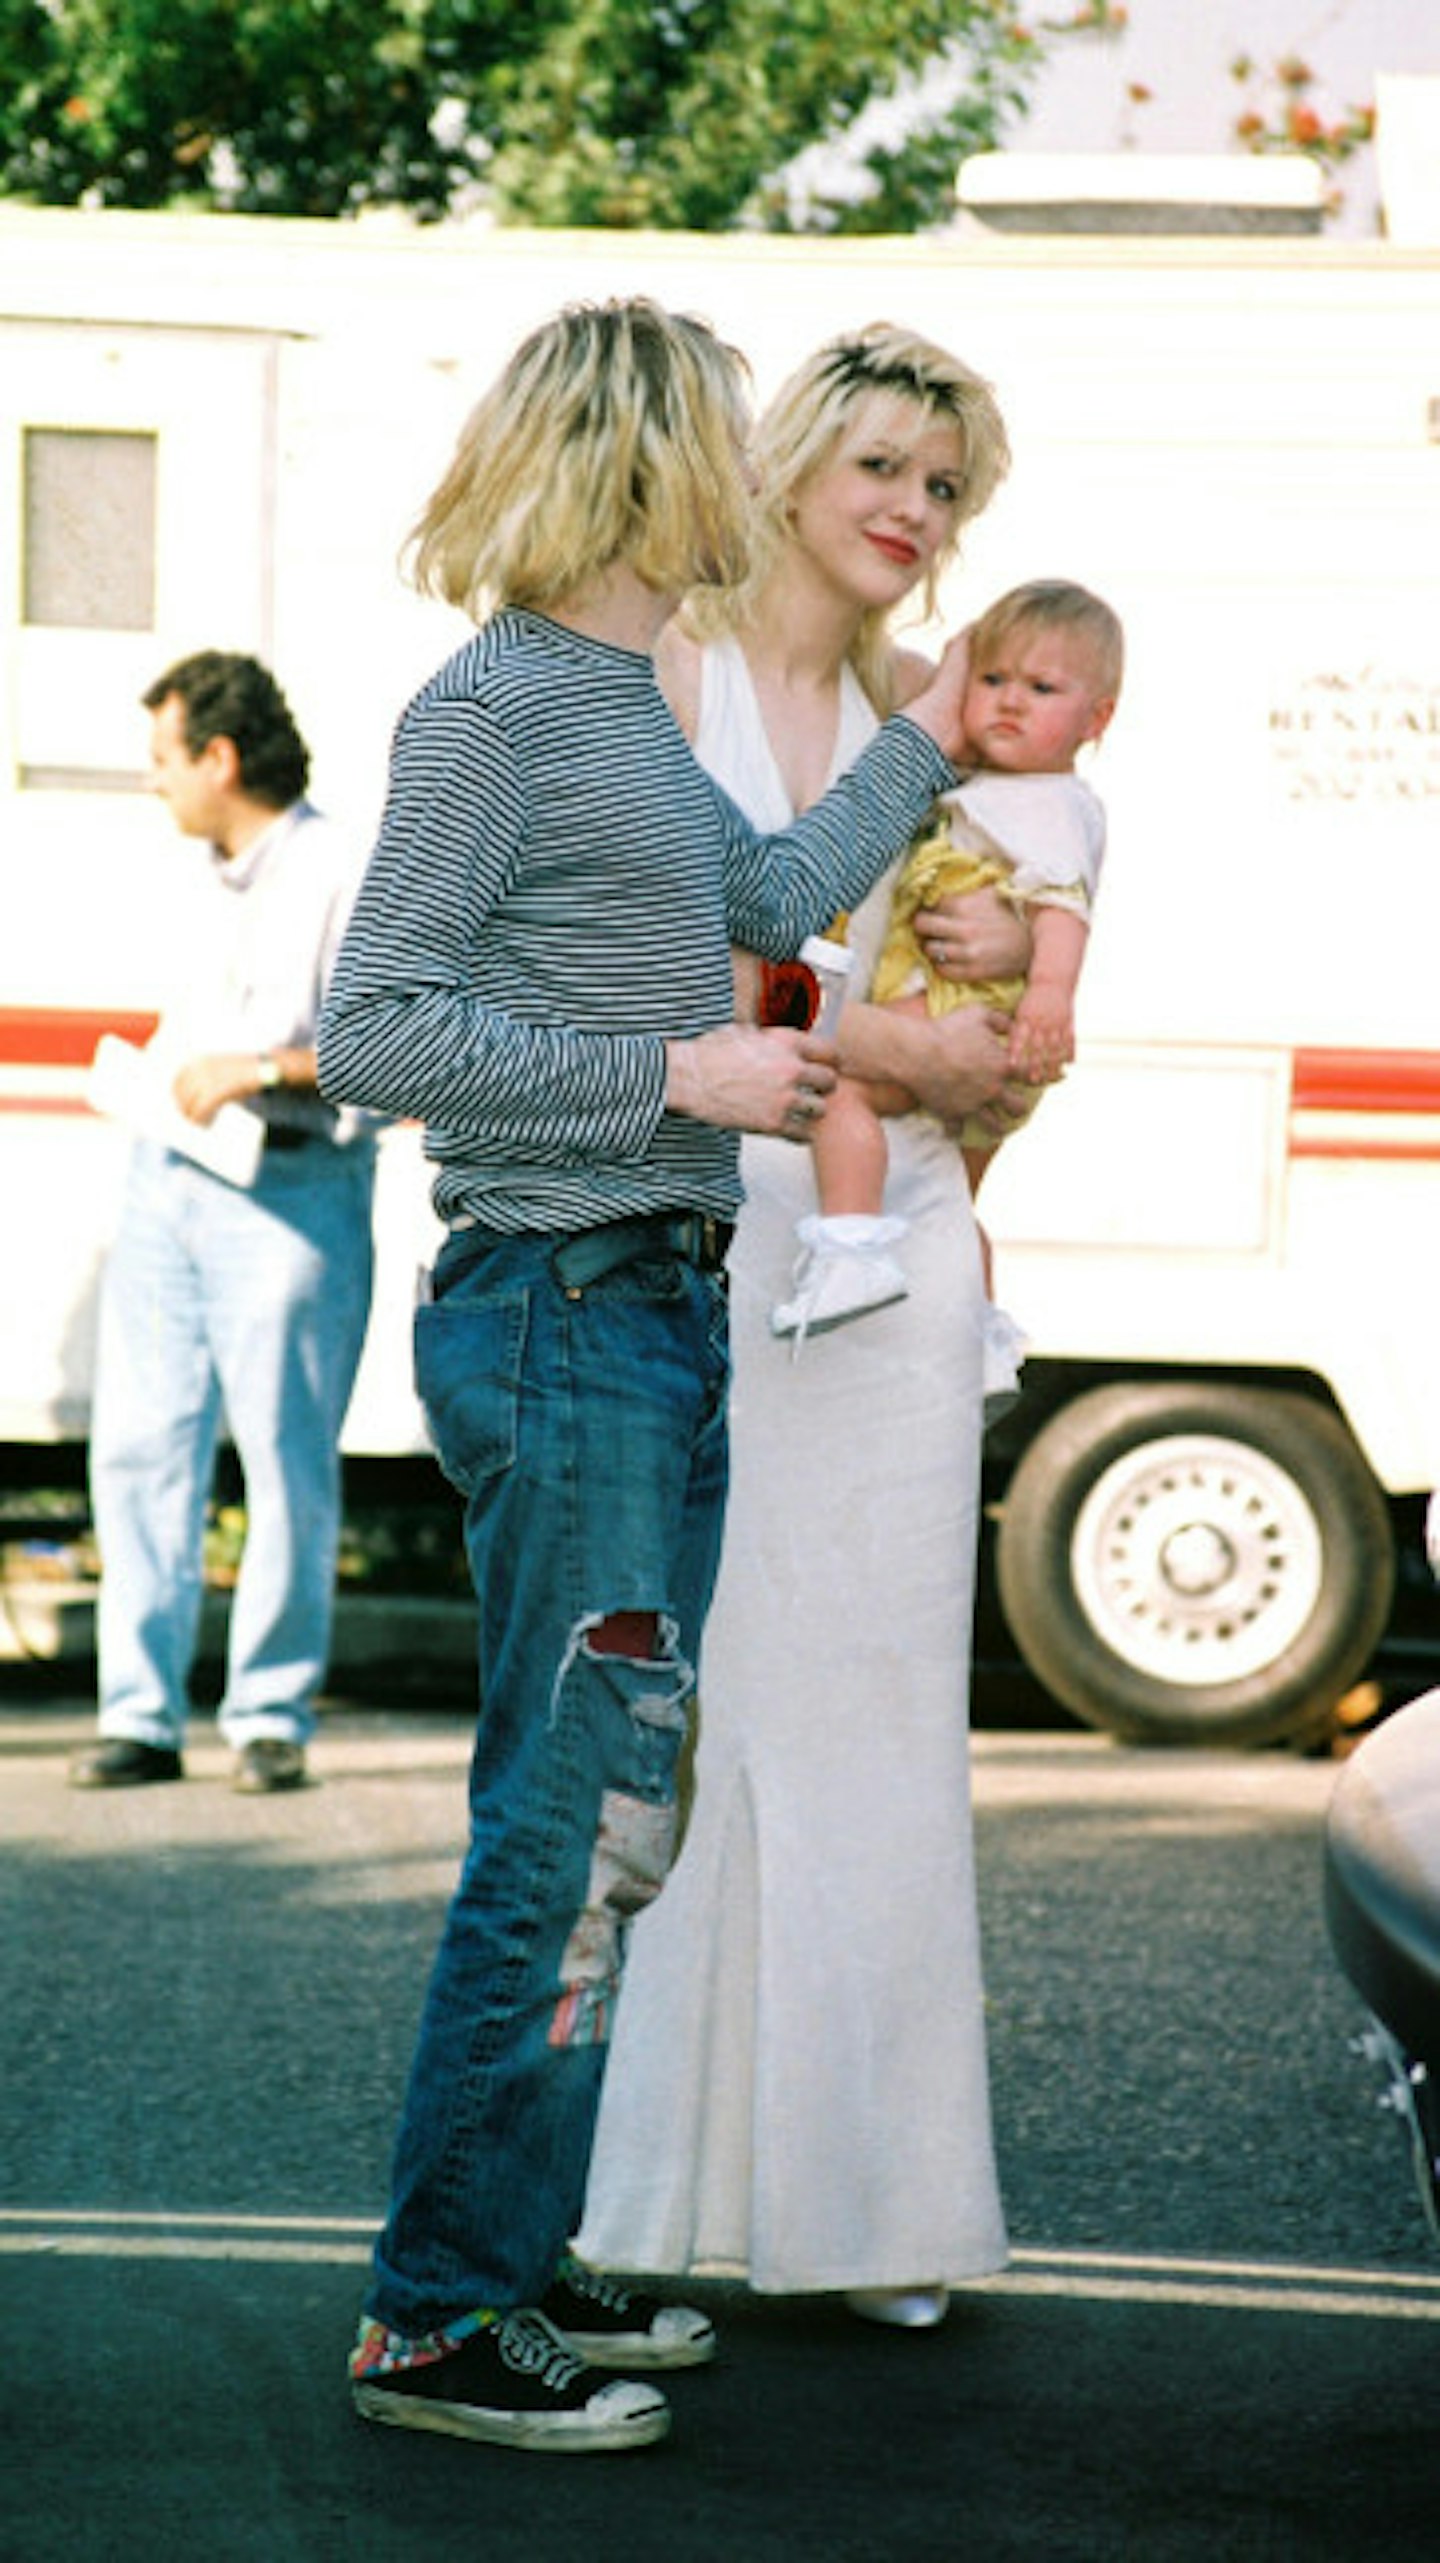 Kurt Cobain and Courtney Love with their baby daughter